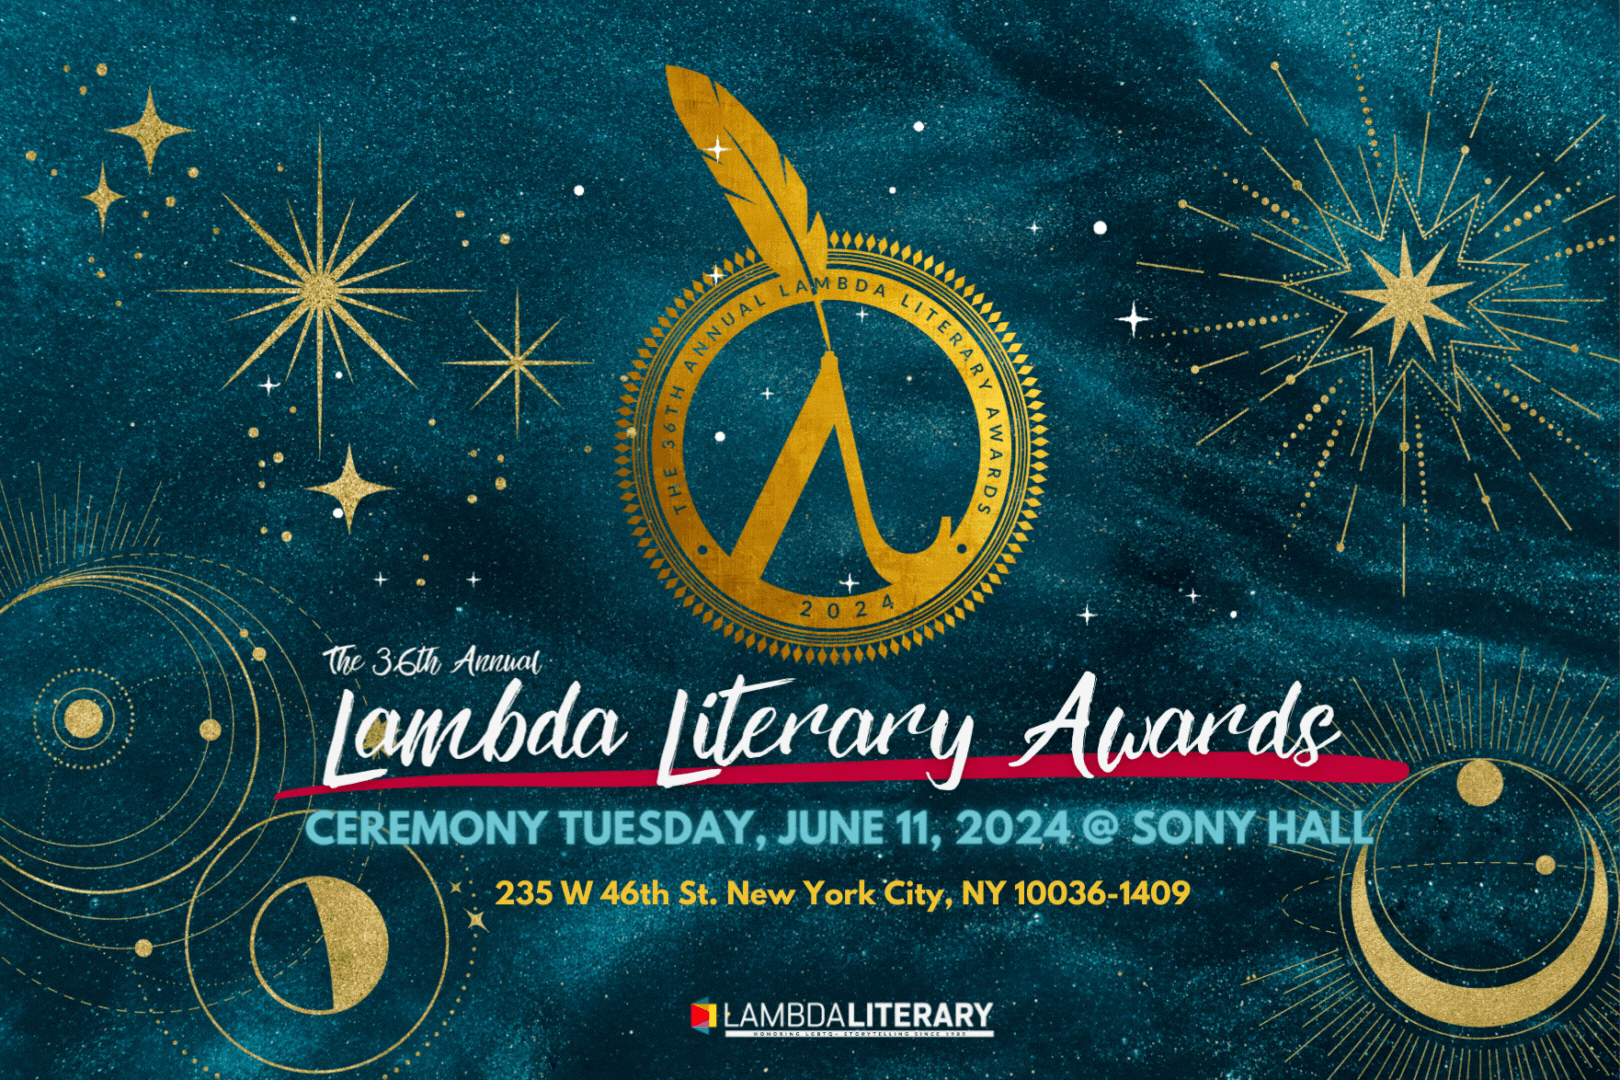 The 2024 Lammy Awards ceremony will be held June 11, 2024 at Sony Hall in New York City! This year's shortlist announcement happens on March 27.